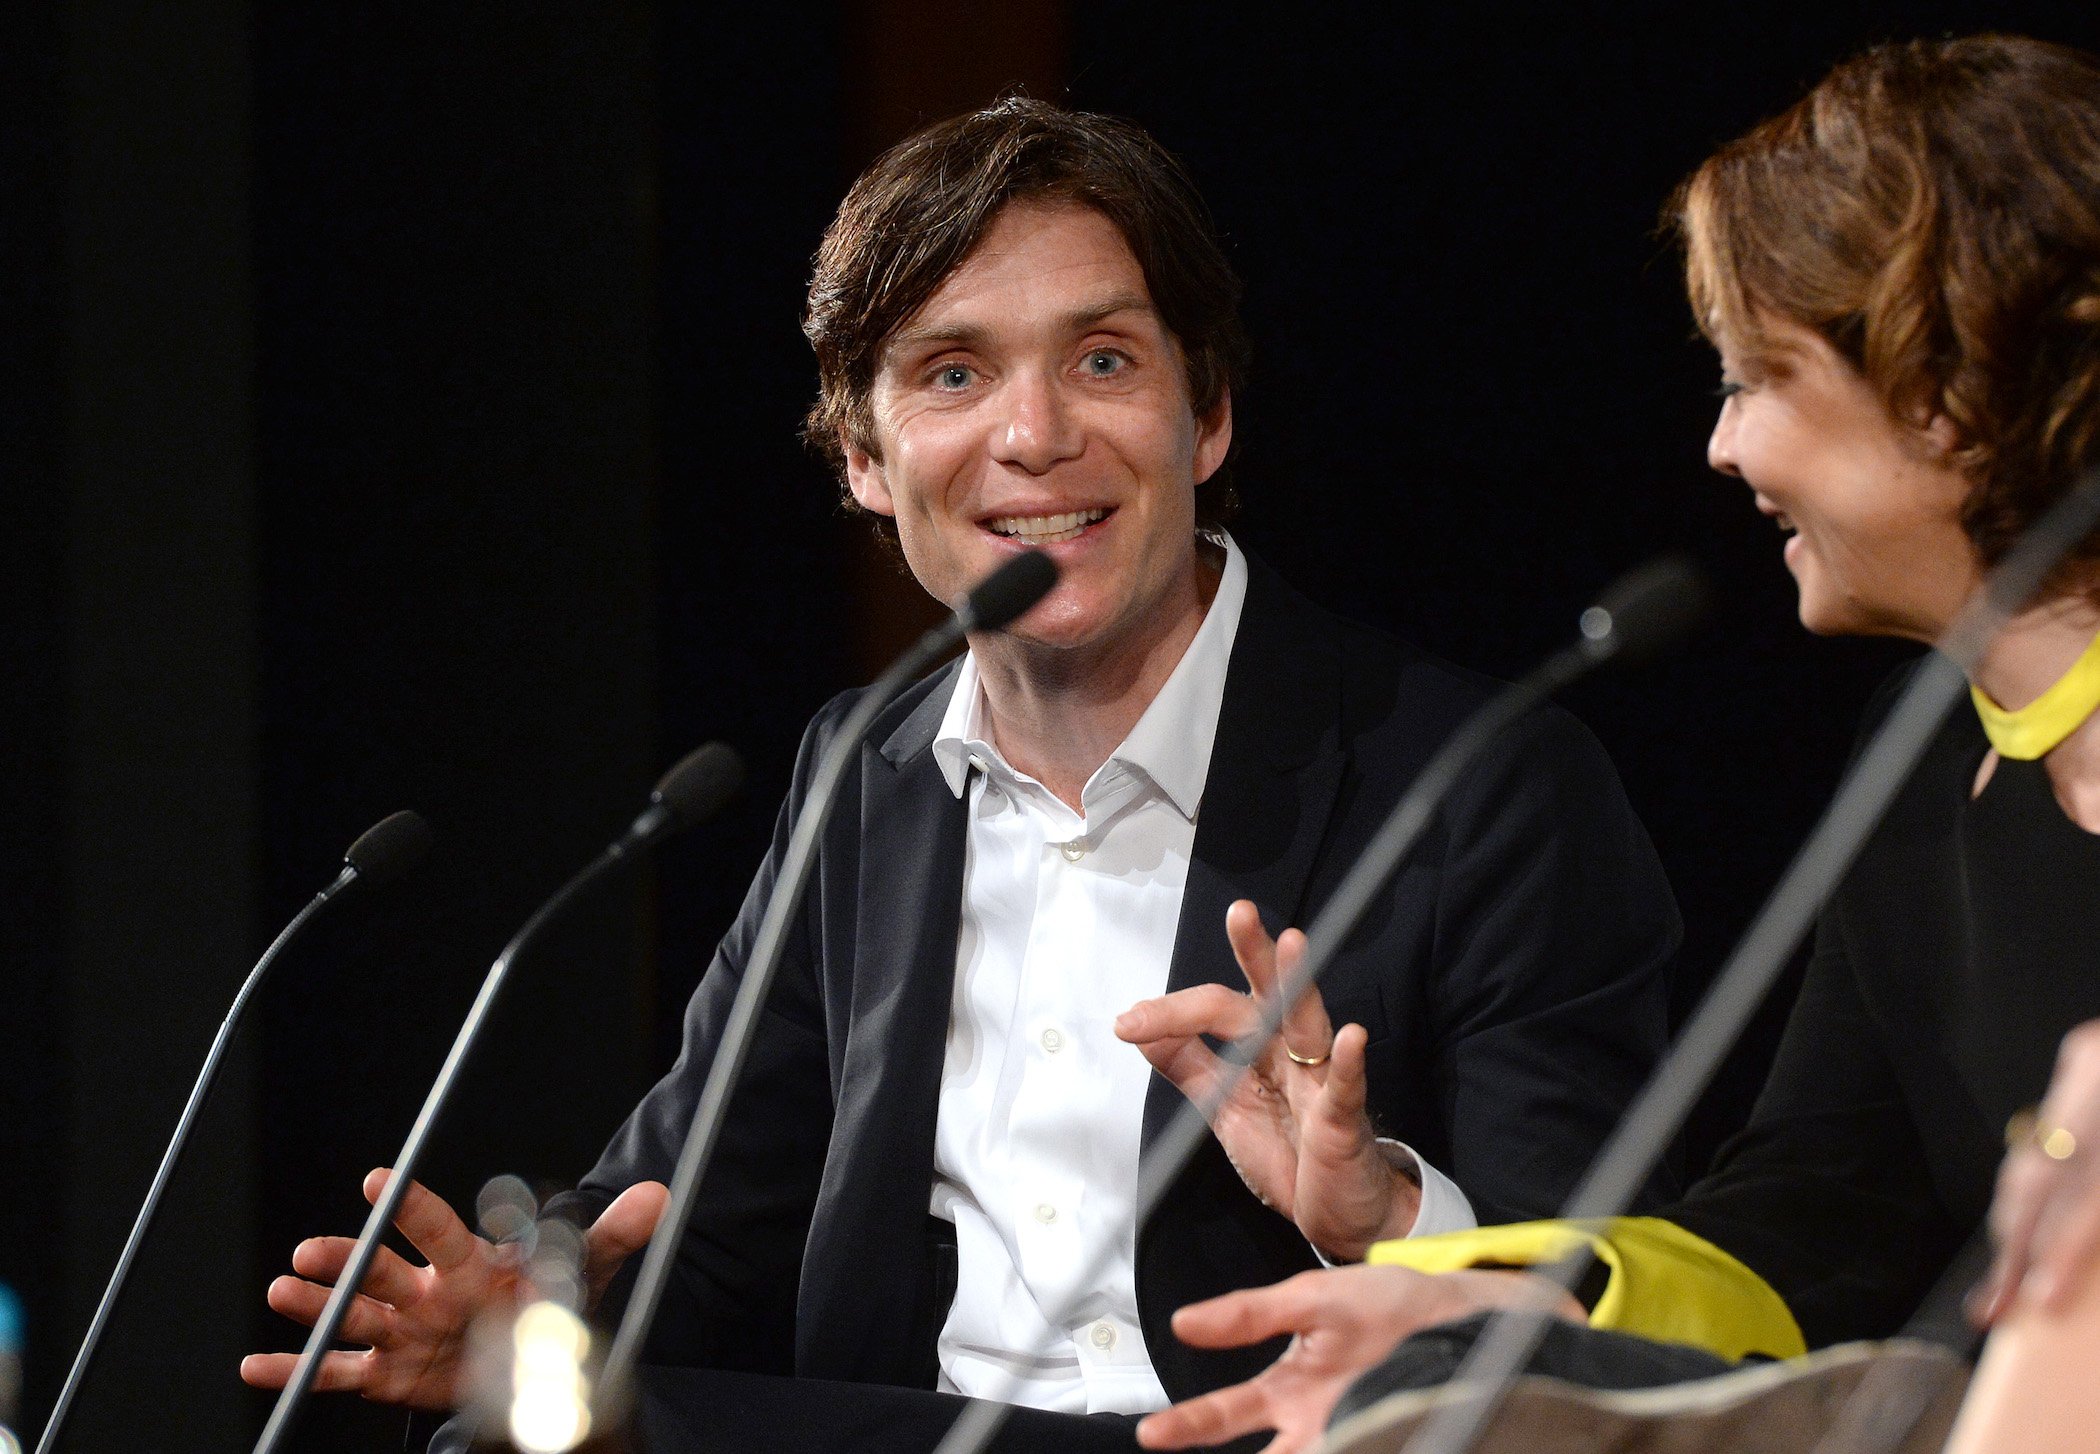 Cillian Murphy during a Q&A for 'Peaky Blinders' Season 6. He's against a black background in front of a microphone.